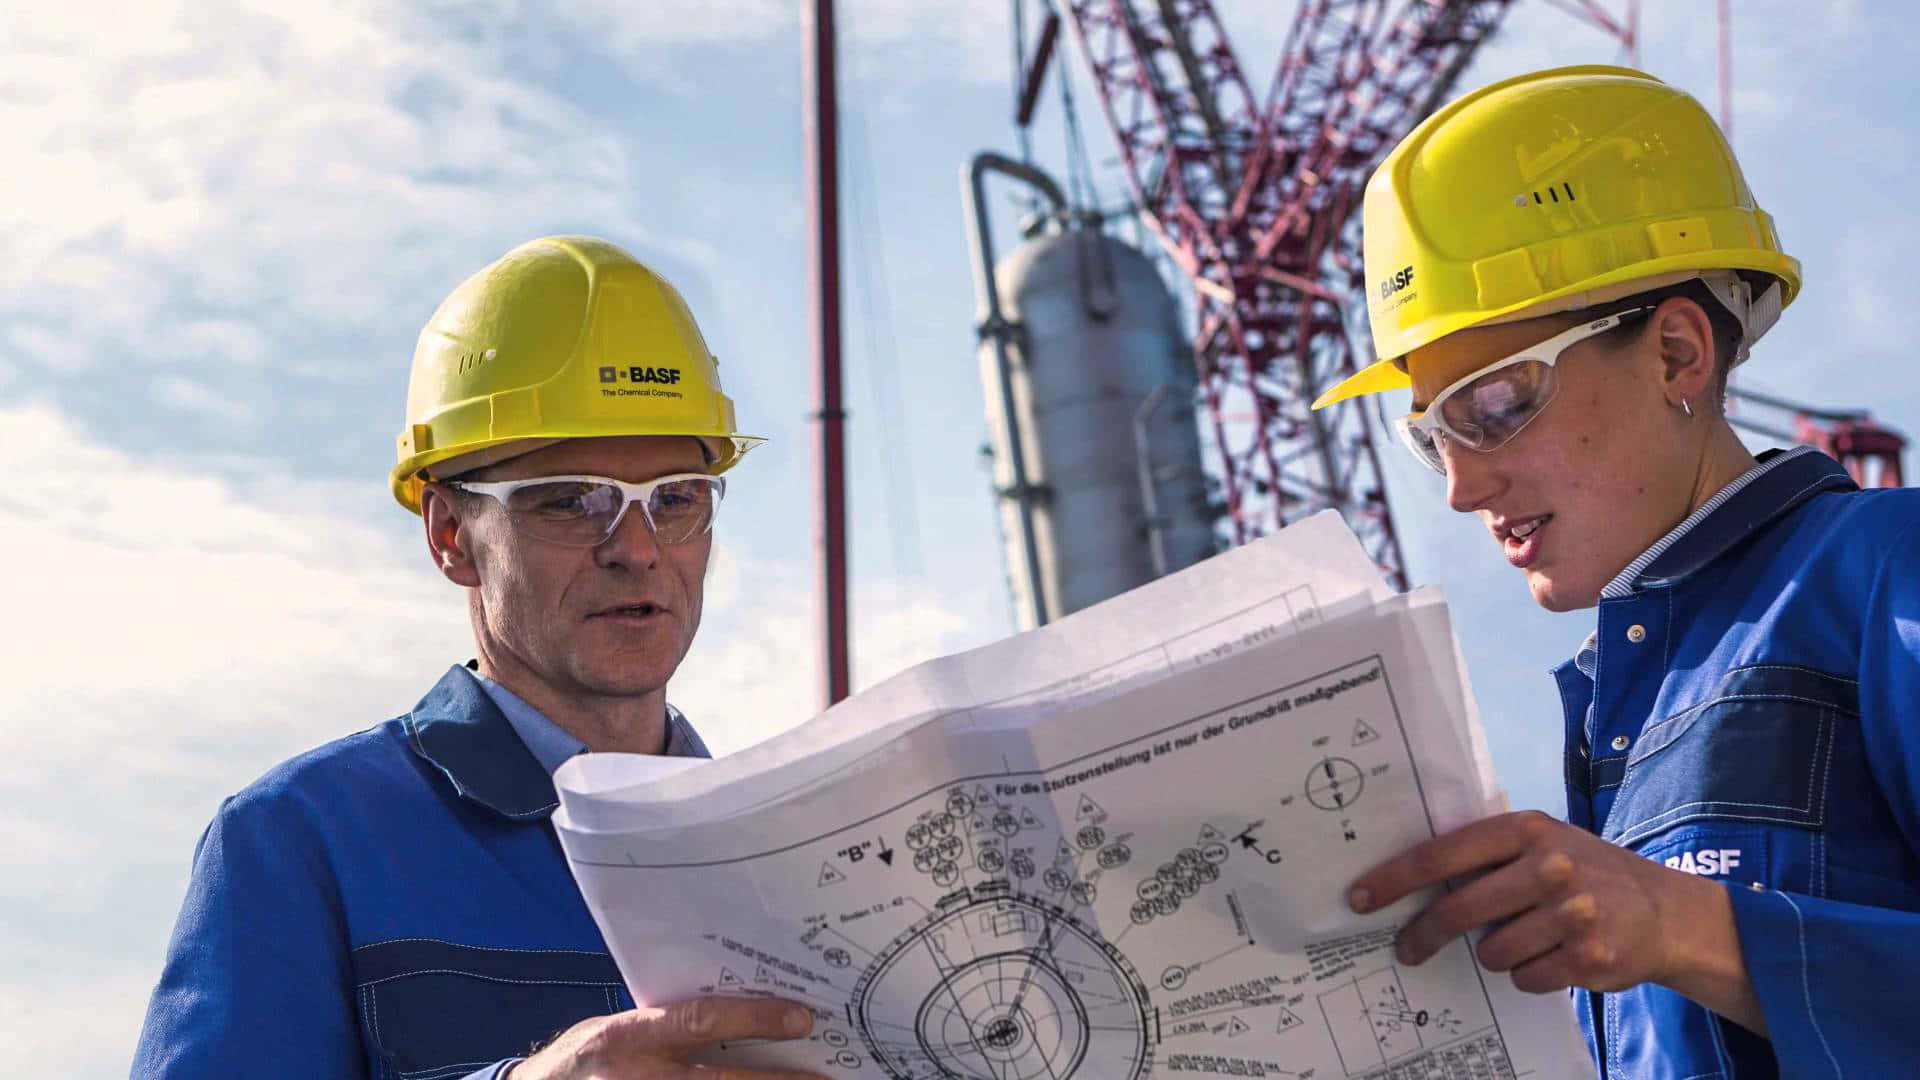 An engineer looking over blueprints for a project